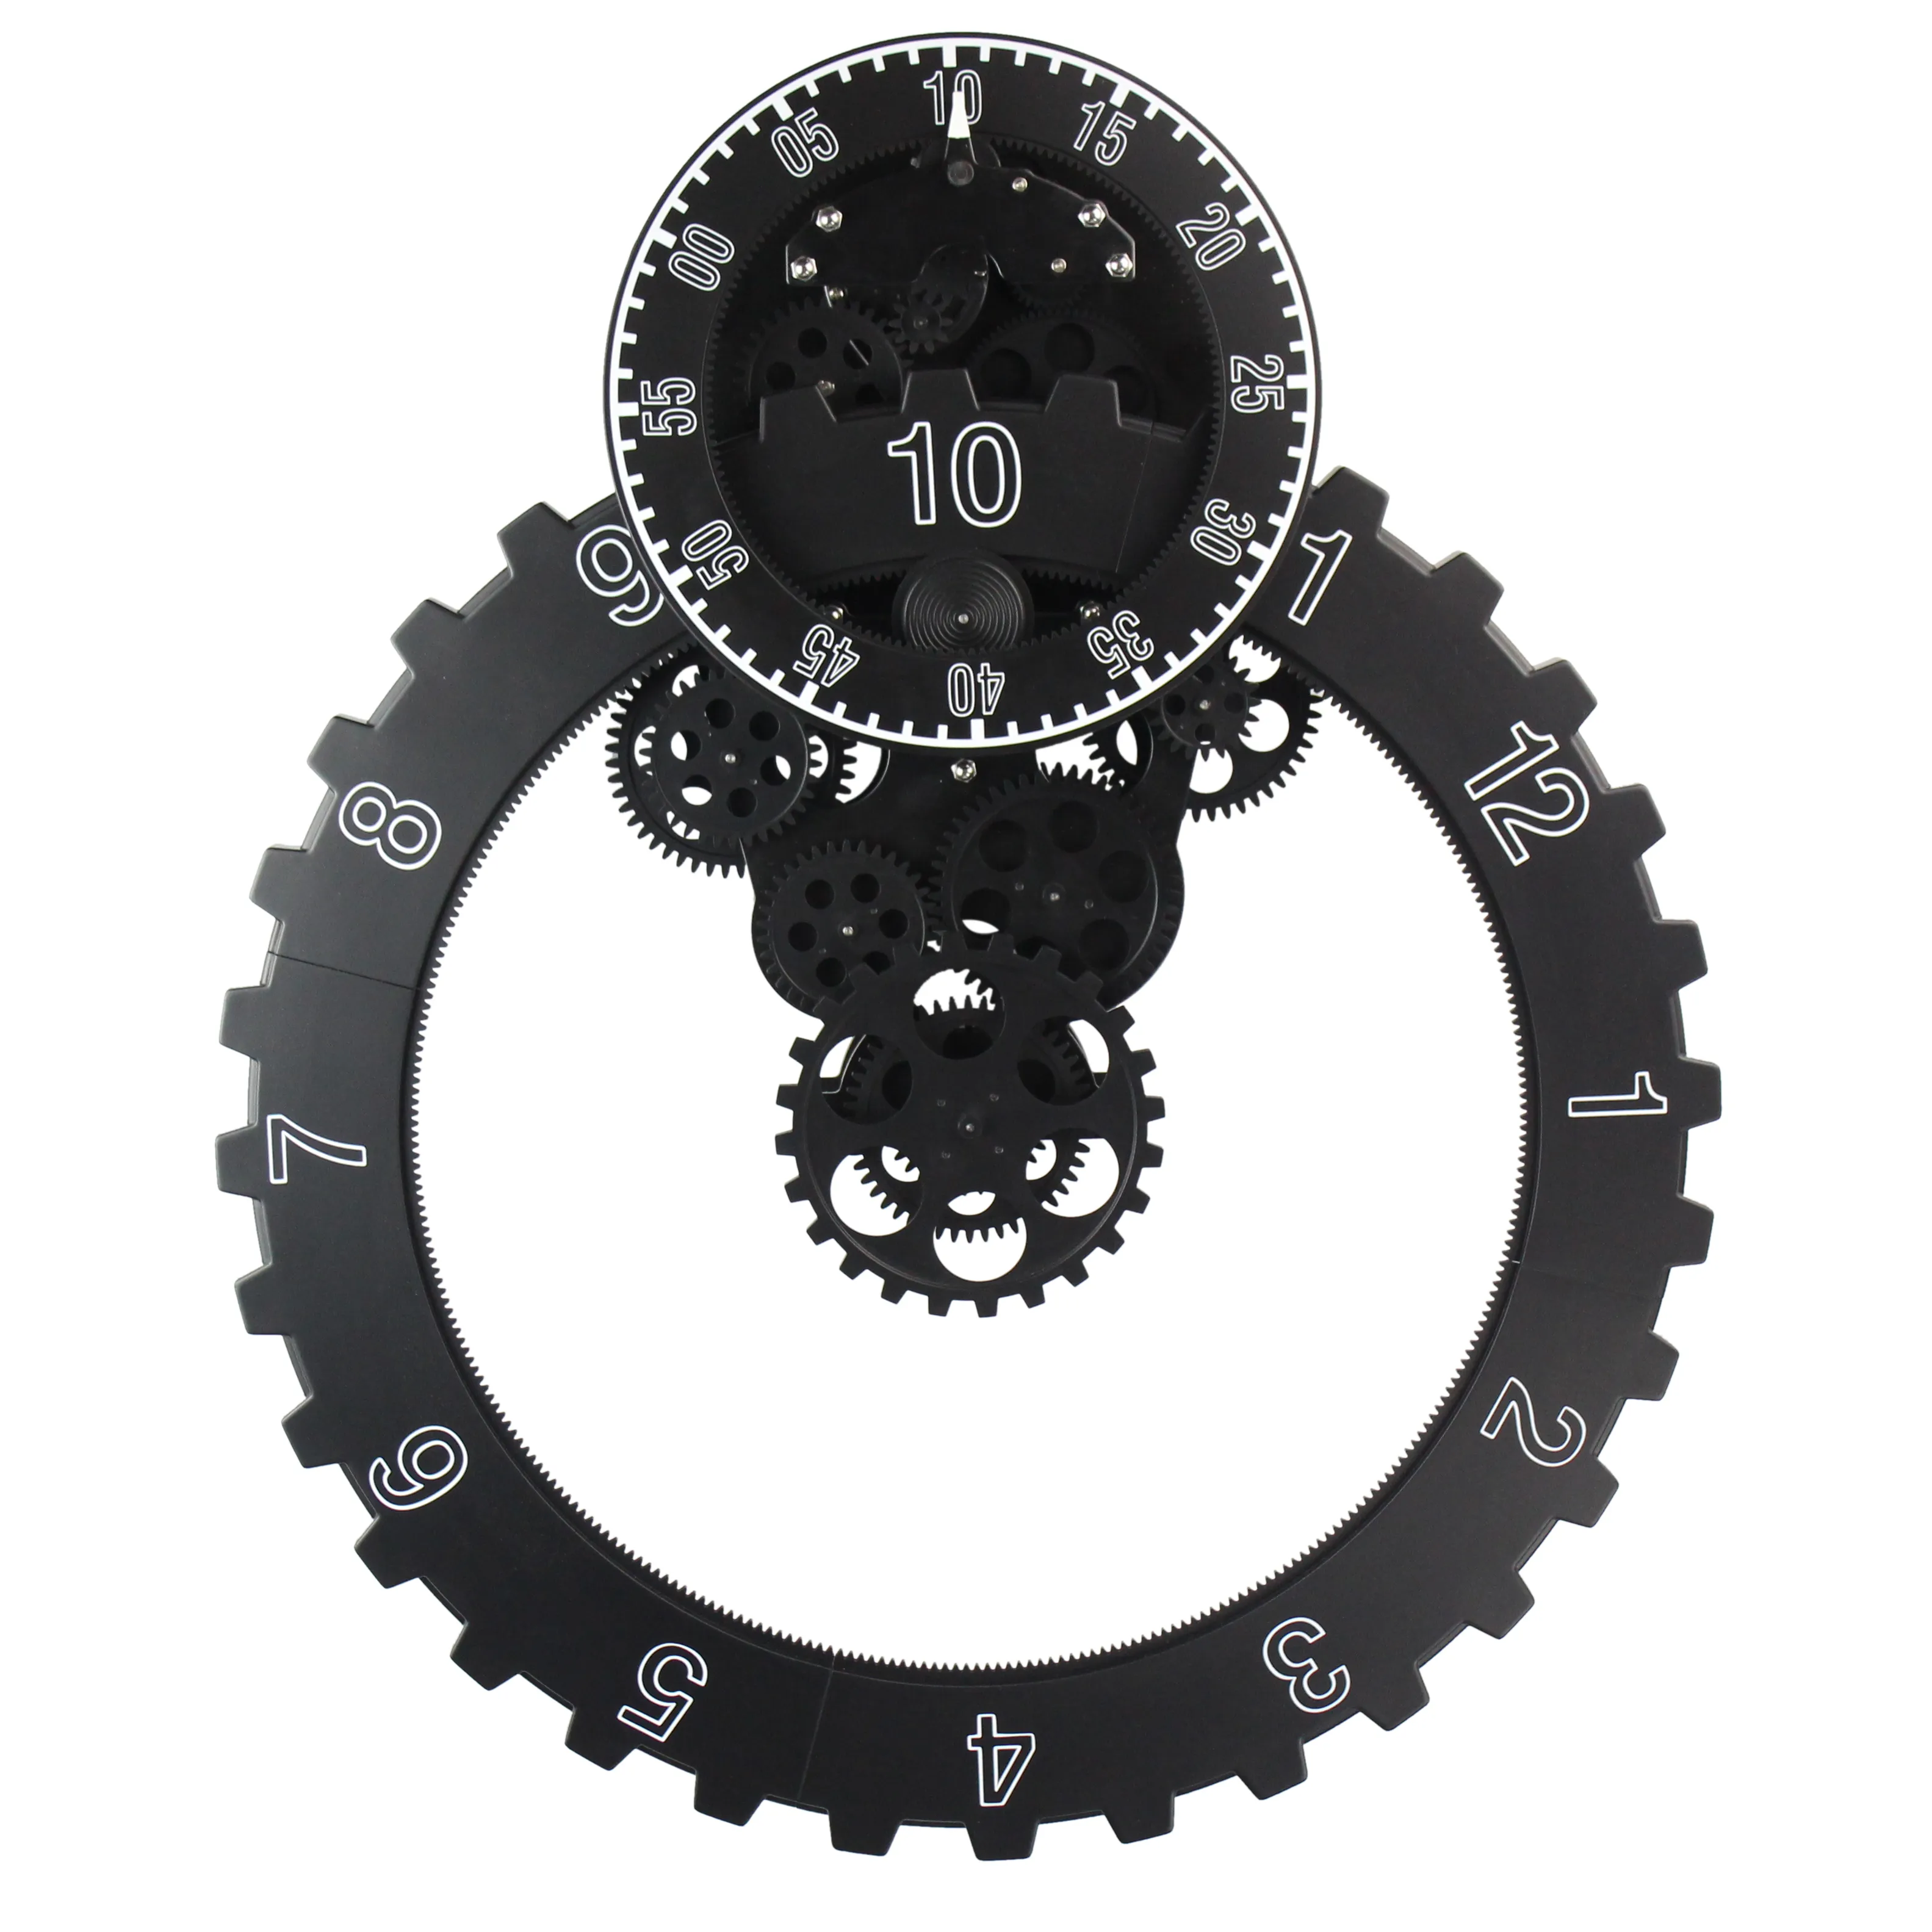 Factory ABS Premium Round Large Gear Shape Creative Industrial 3D Modern Gear Home Decor Hanging Mounted Wall Clock